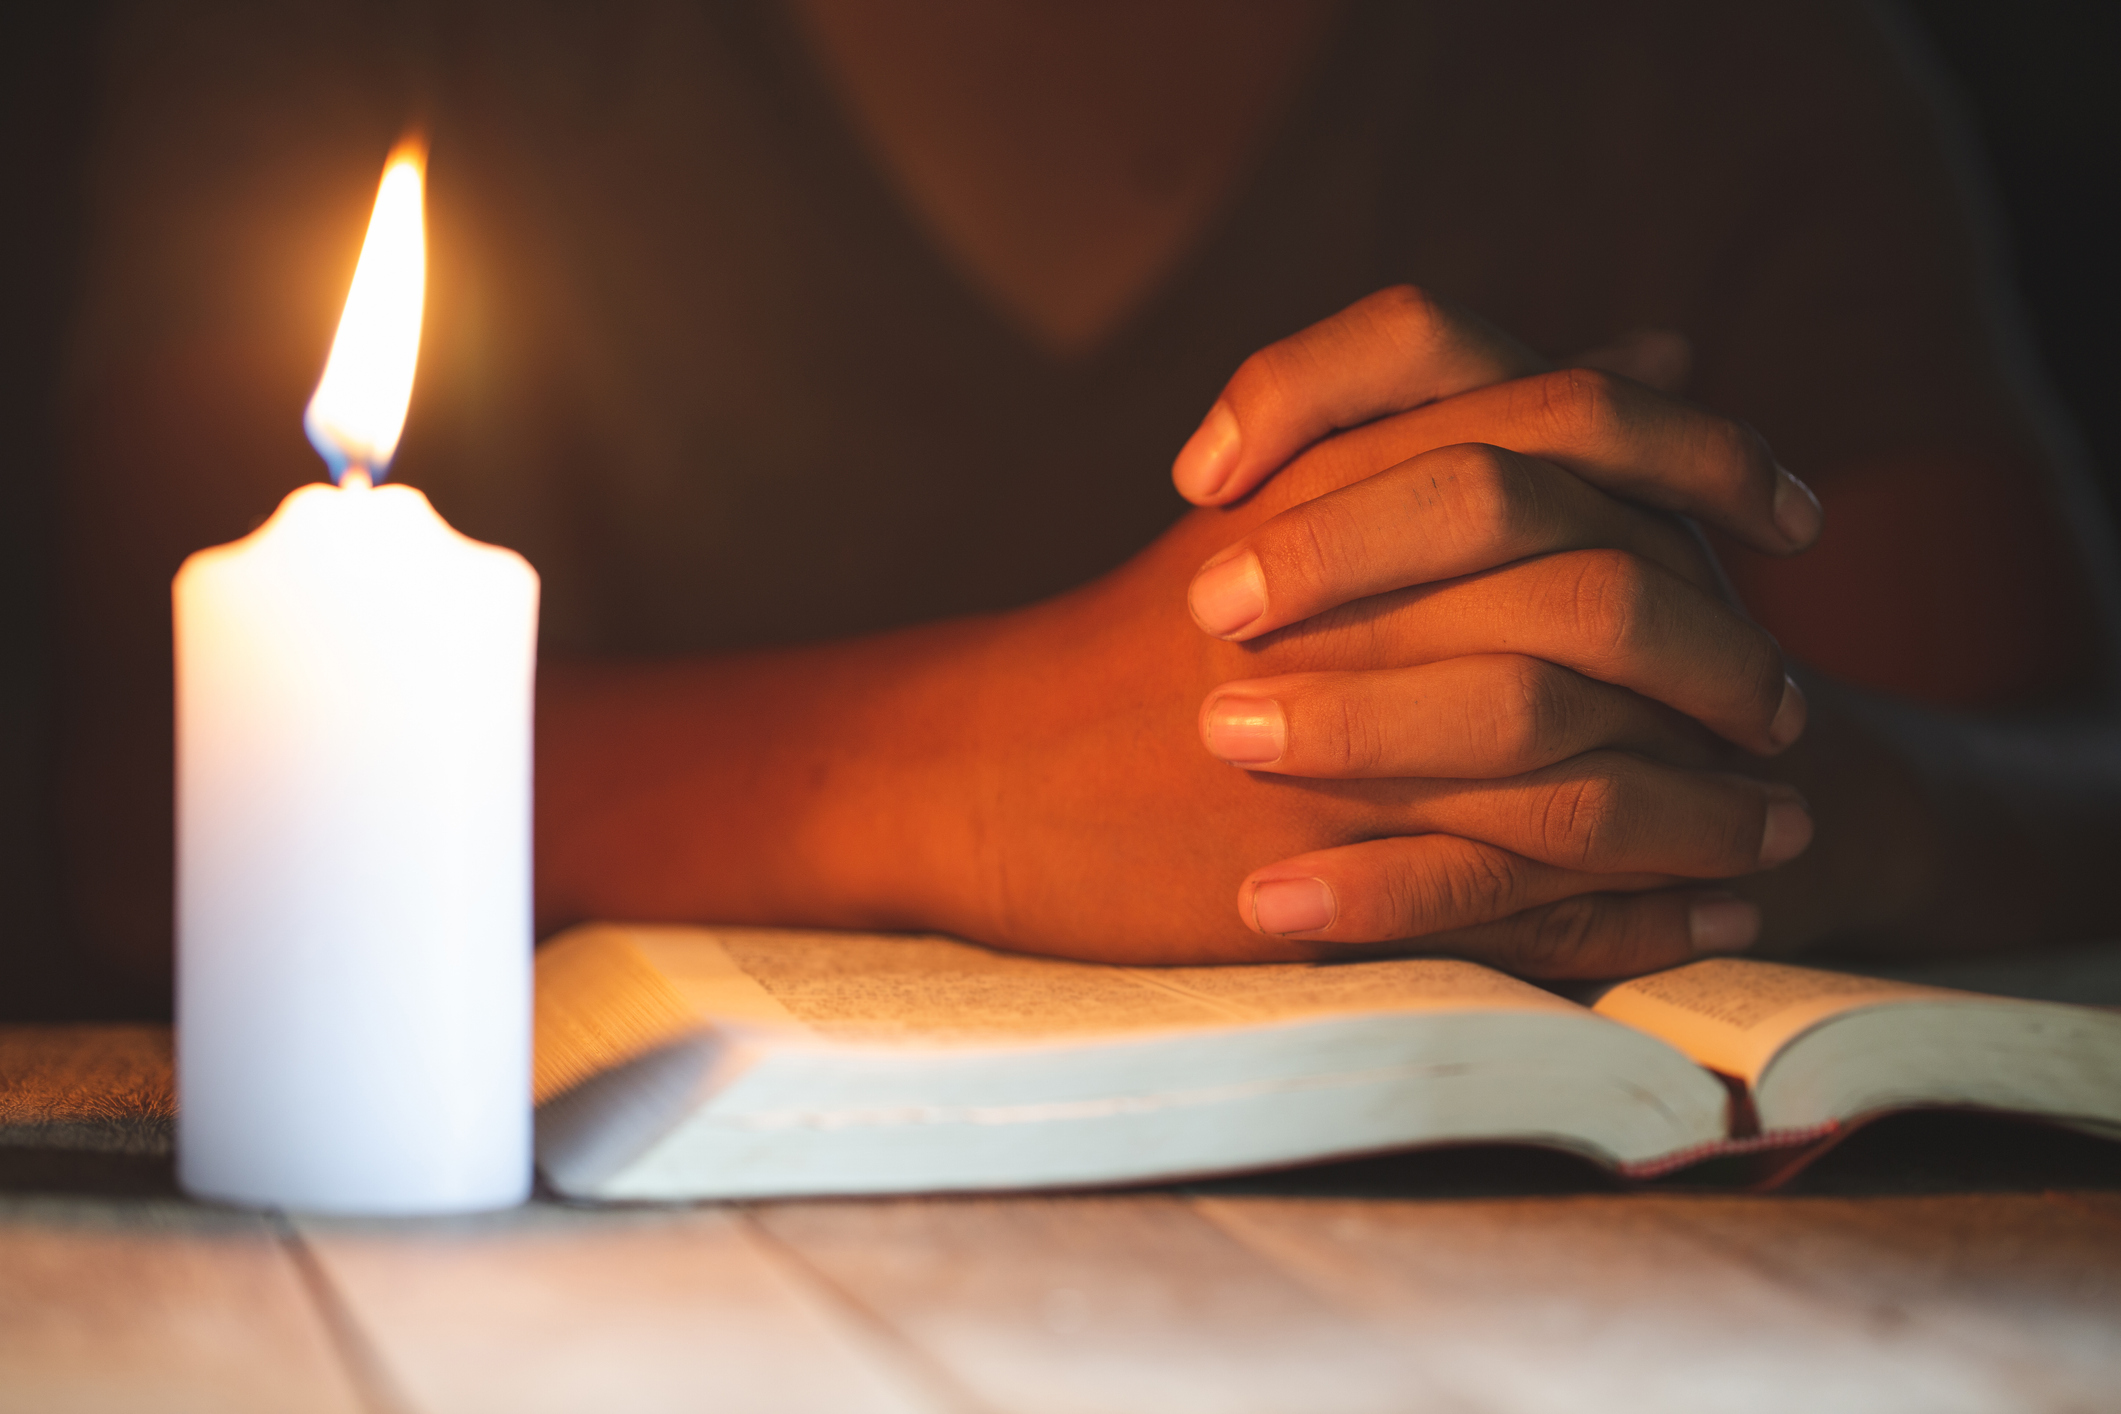 stock photo of person praying with bible in candle light